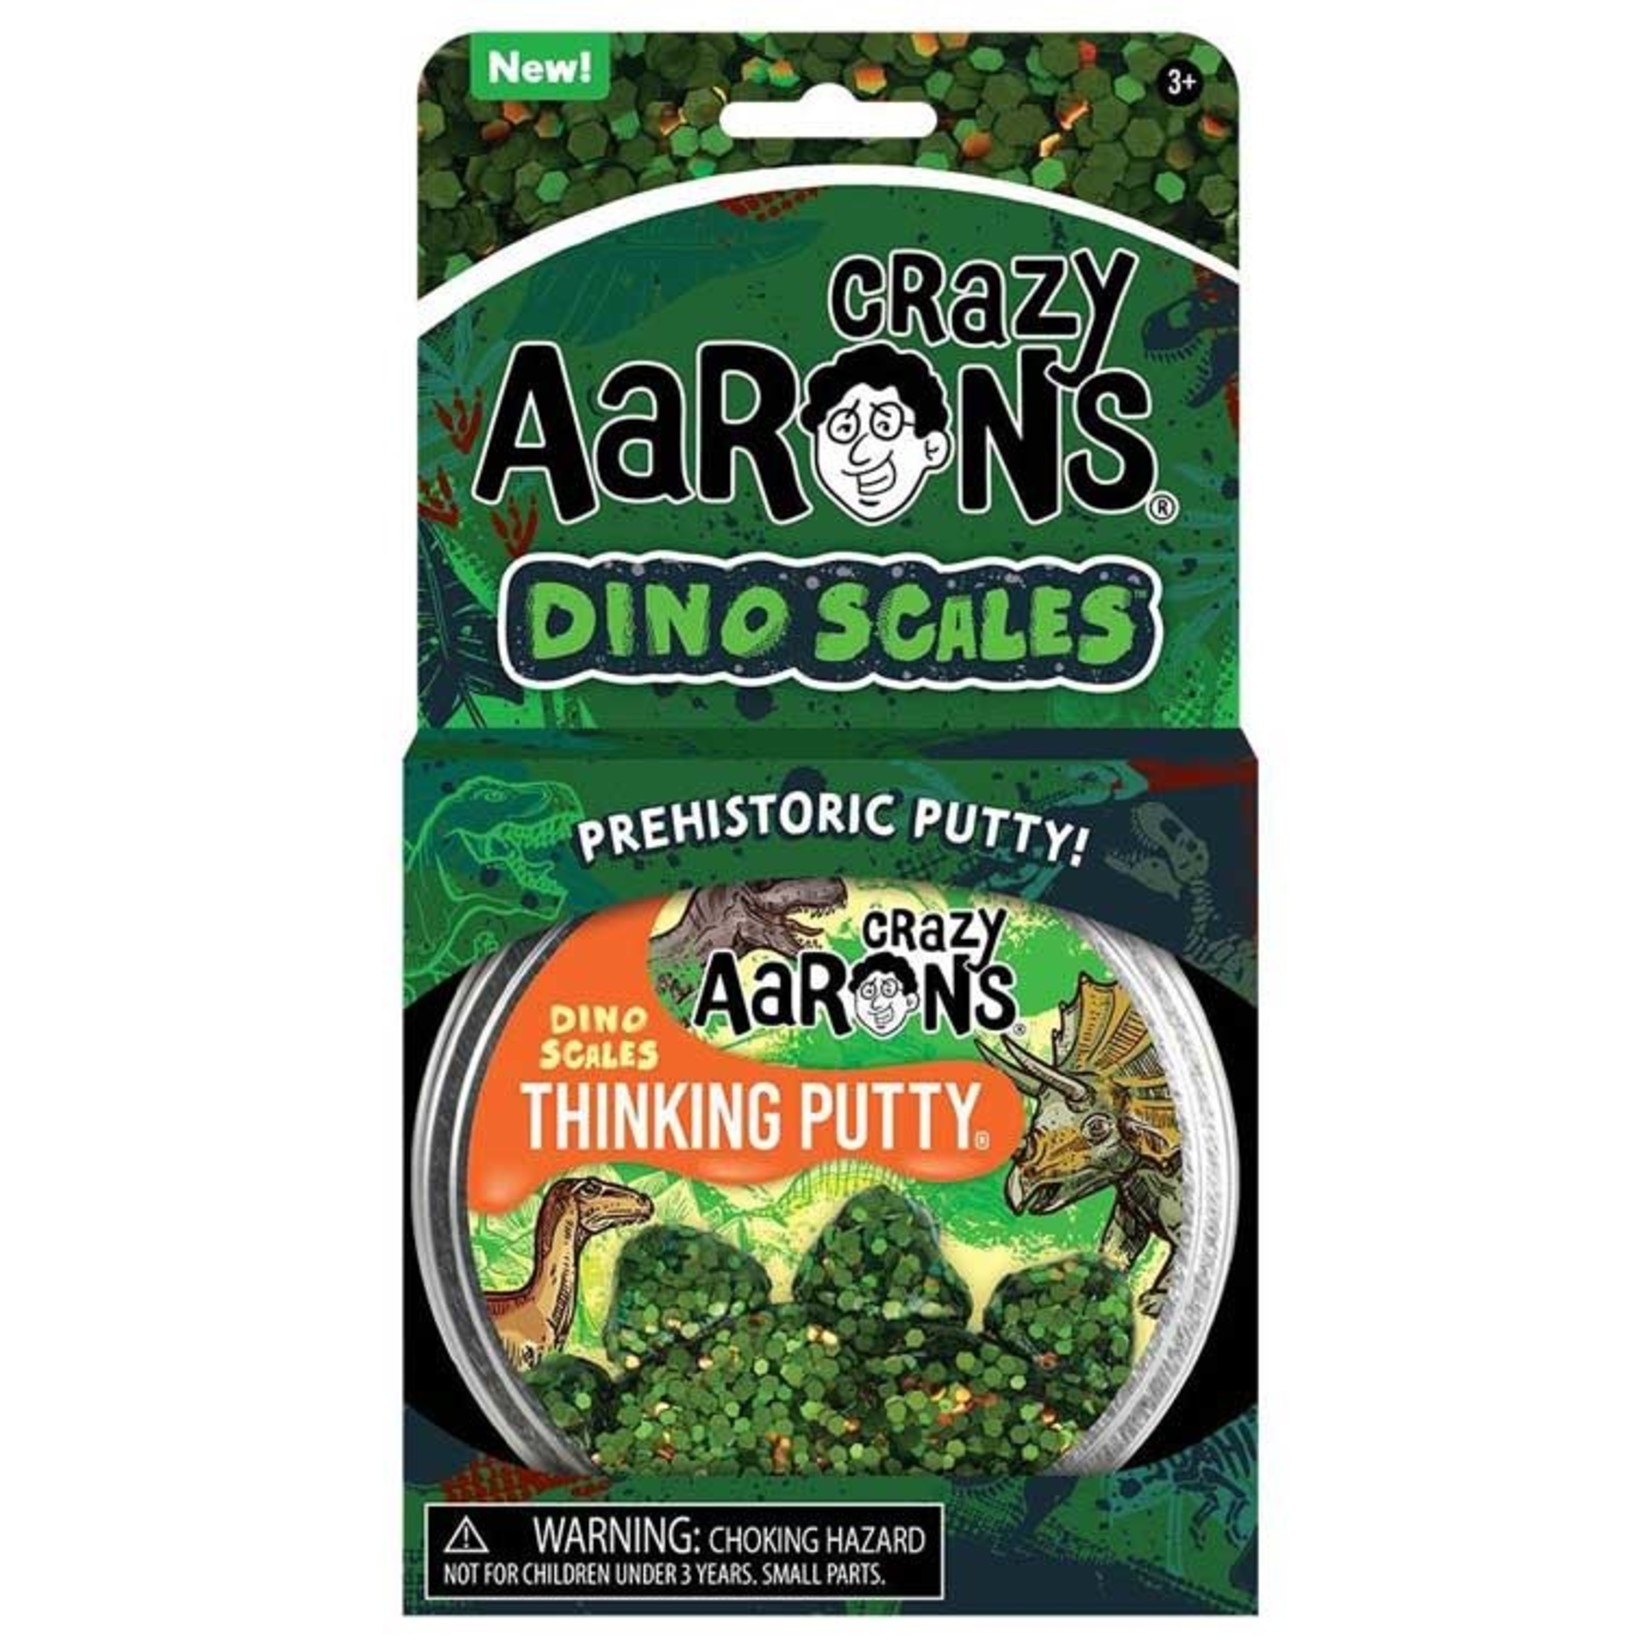 Crazy Aaron's Thinking Putty Dino Scales Thinking Putty